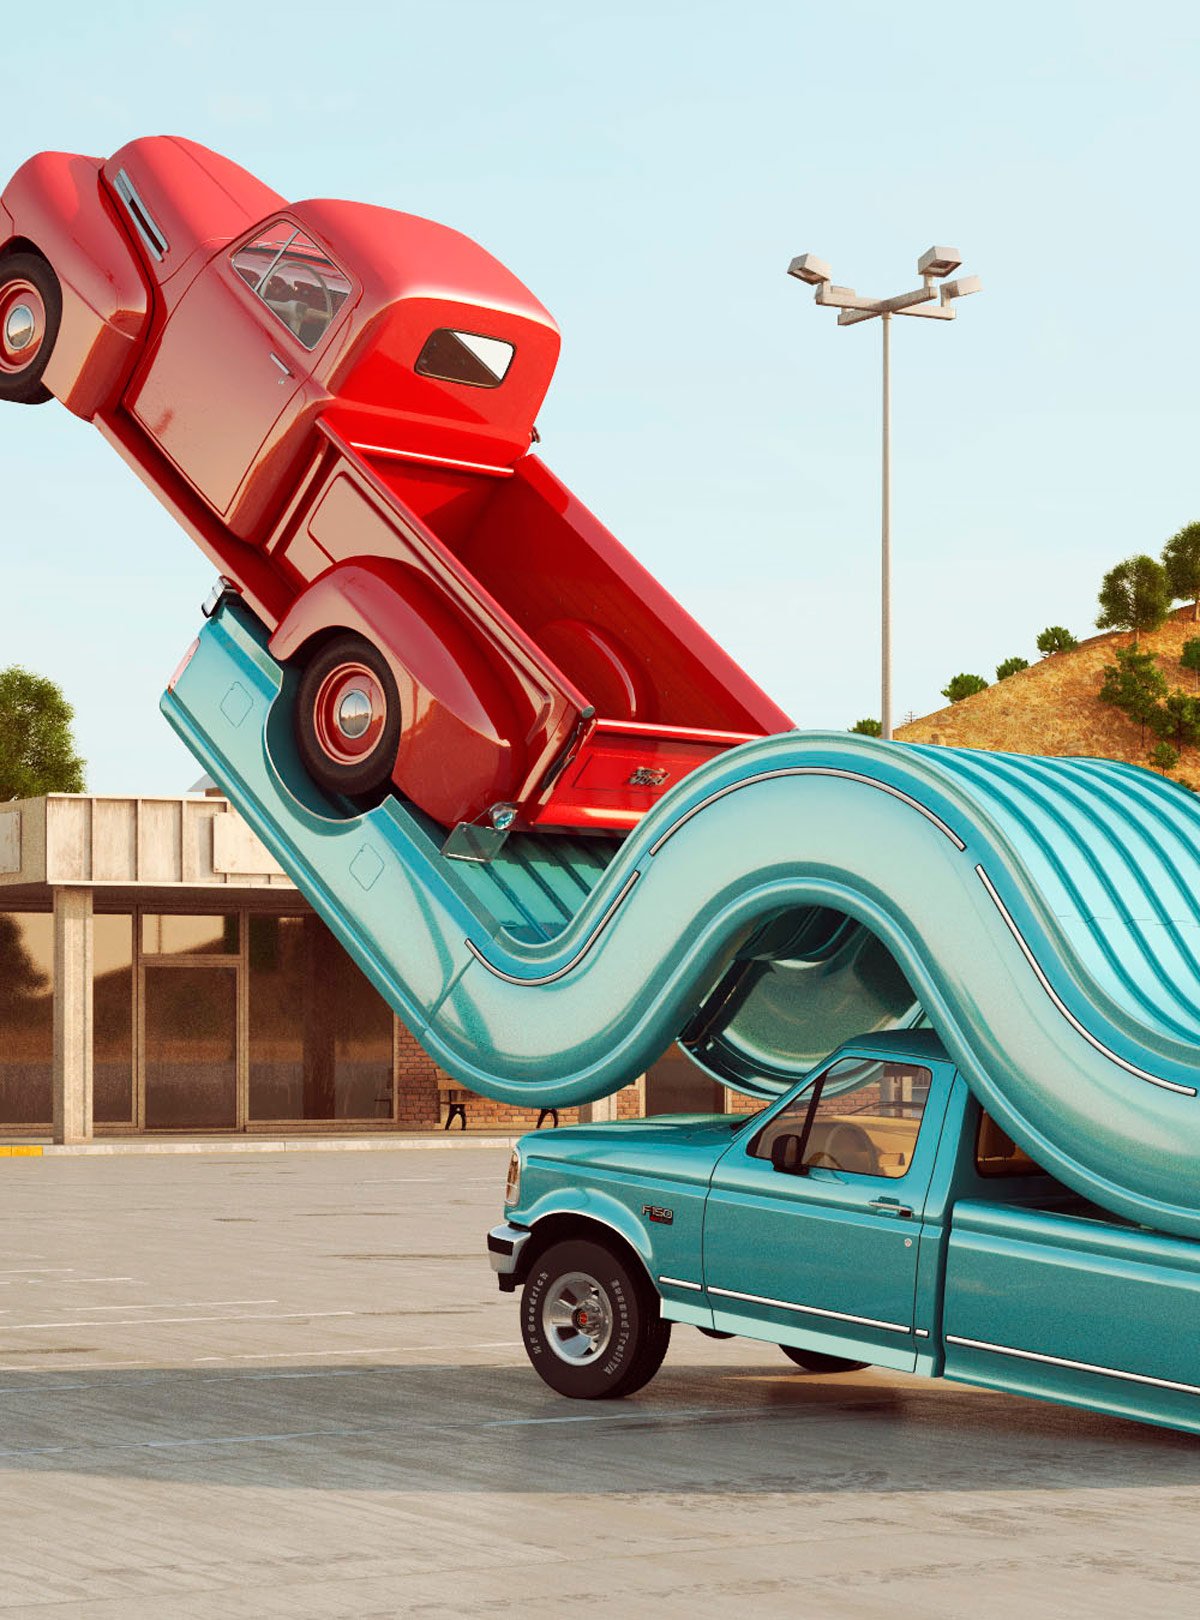 tales-of-auto-elasticity-rendered-photographs-by-chris-labrooy-8